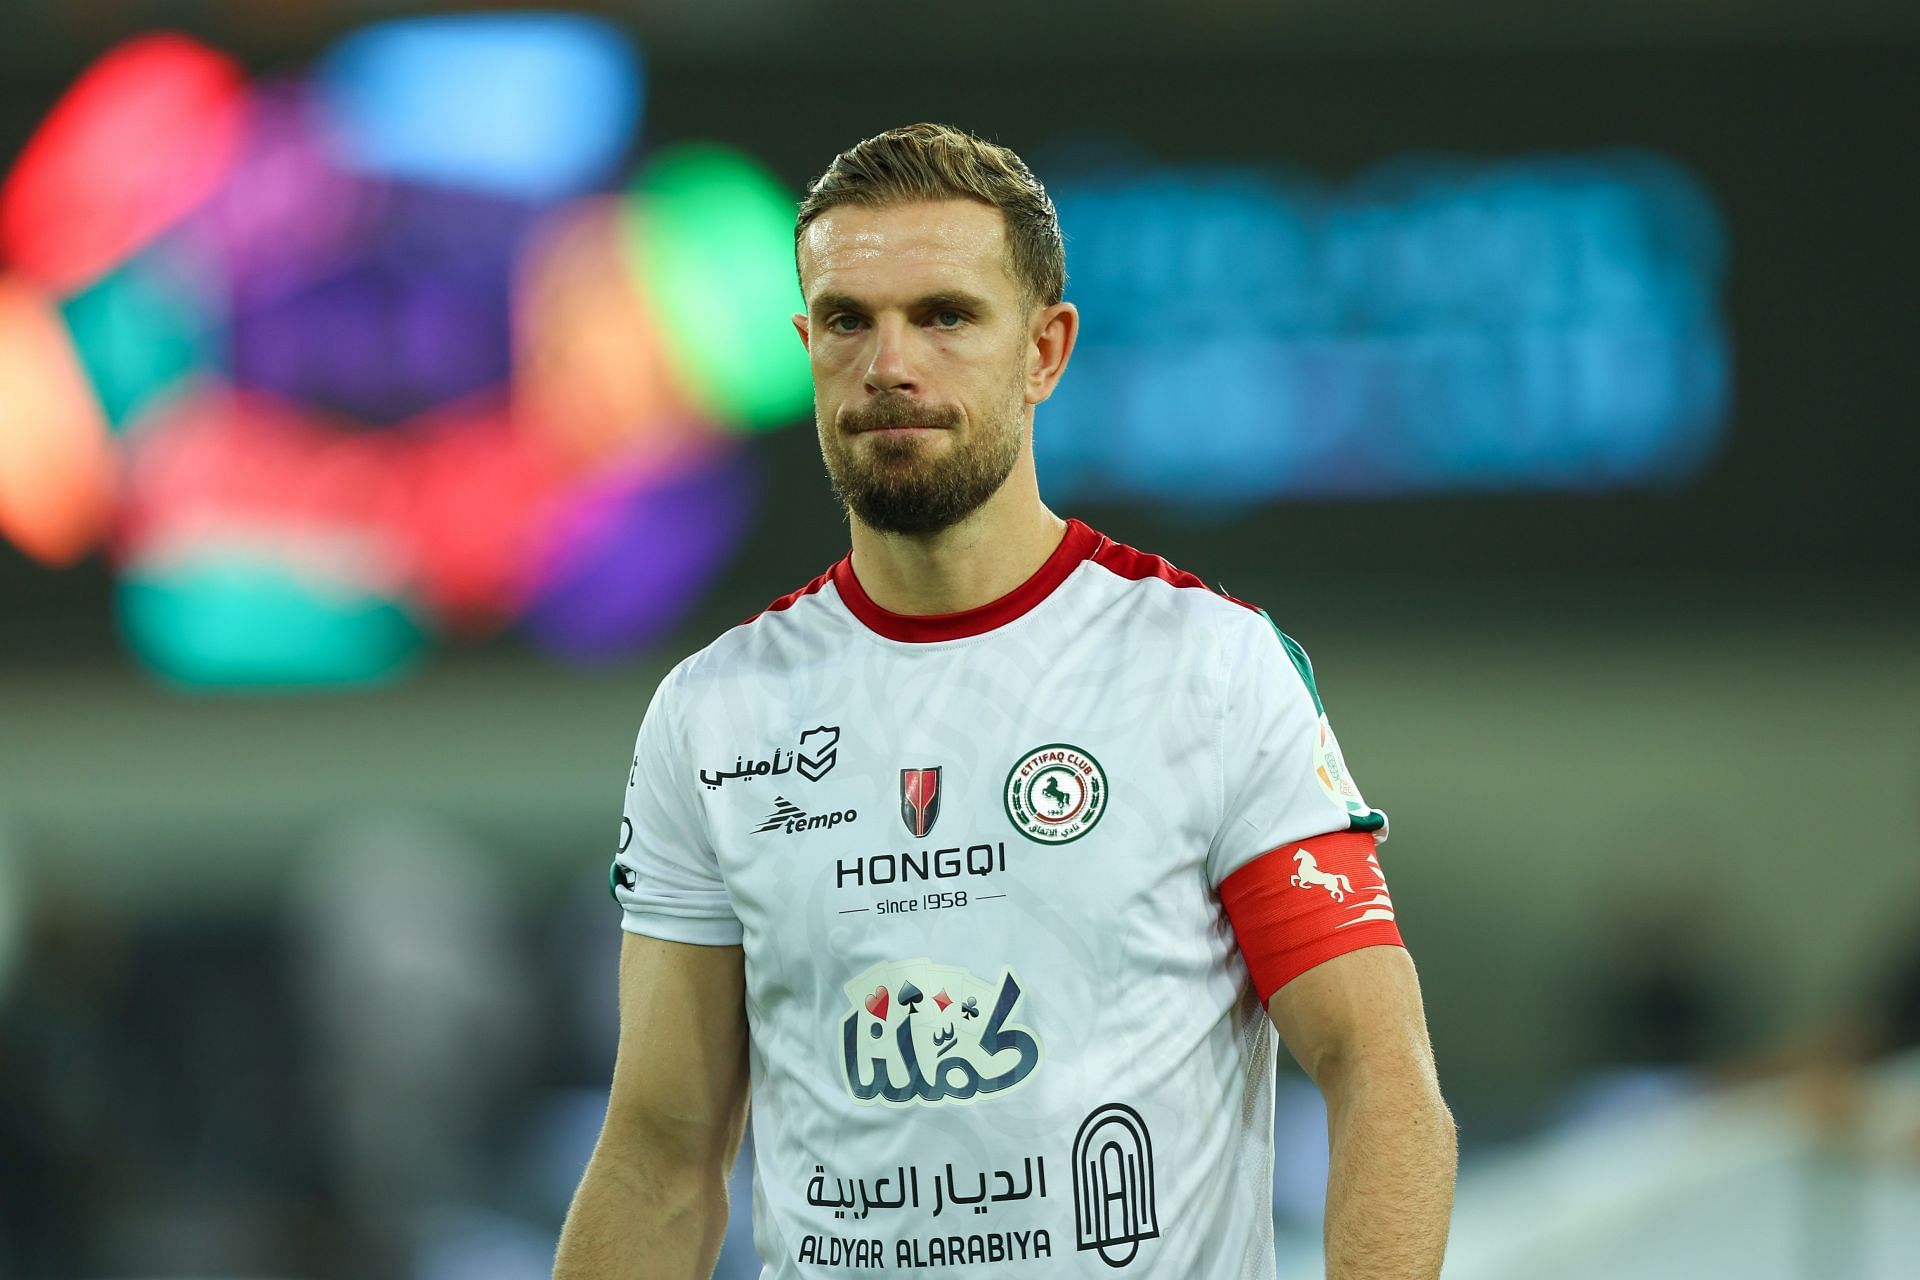 The English midfielder has made a solid start to life in Saudi Arabia.